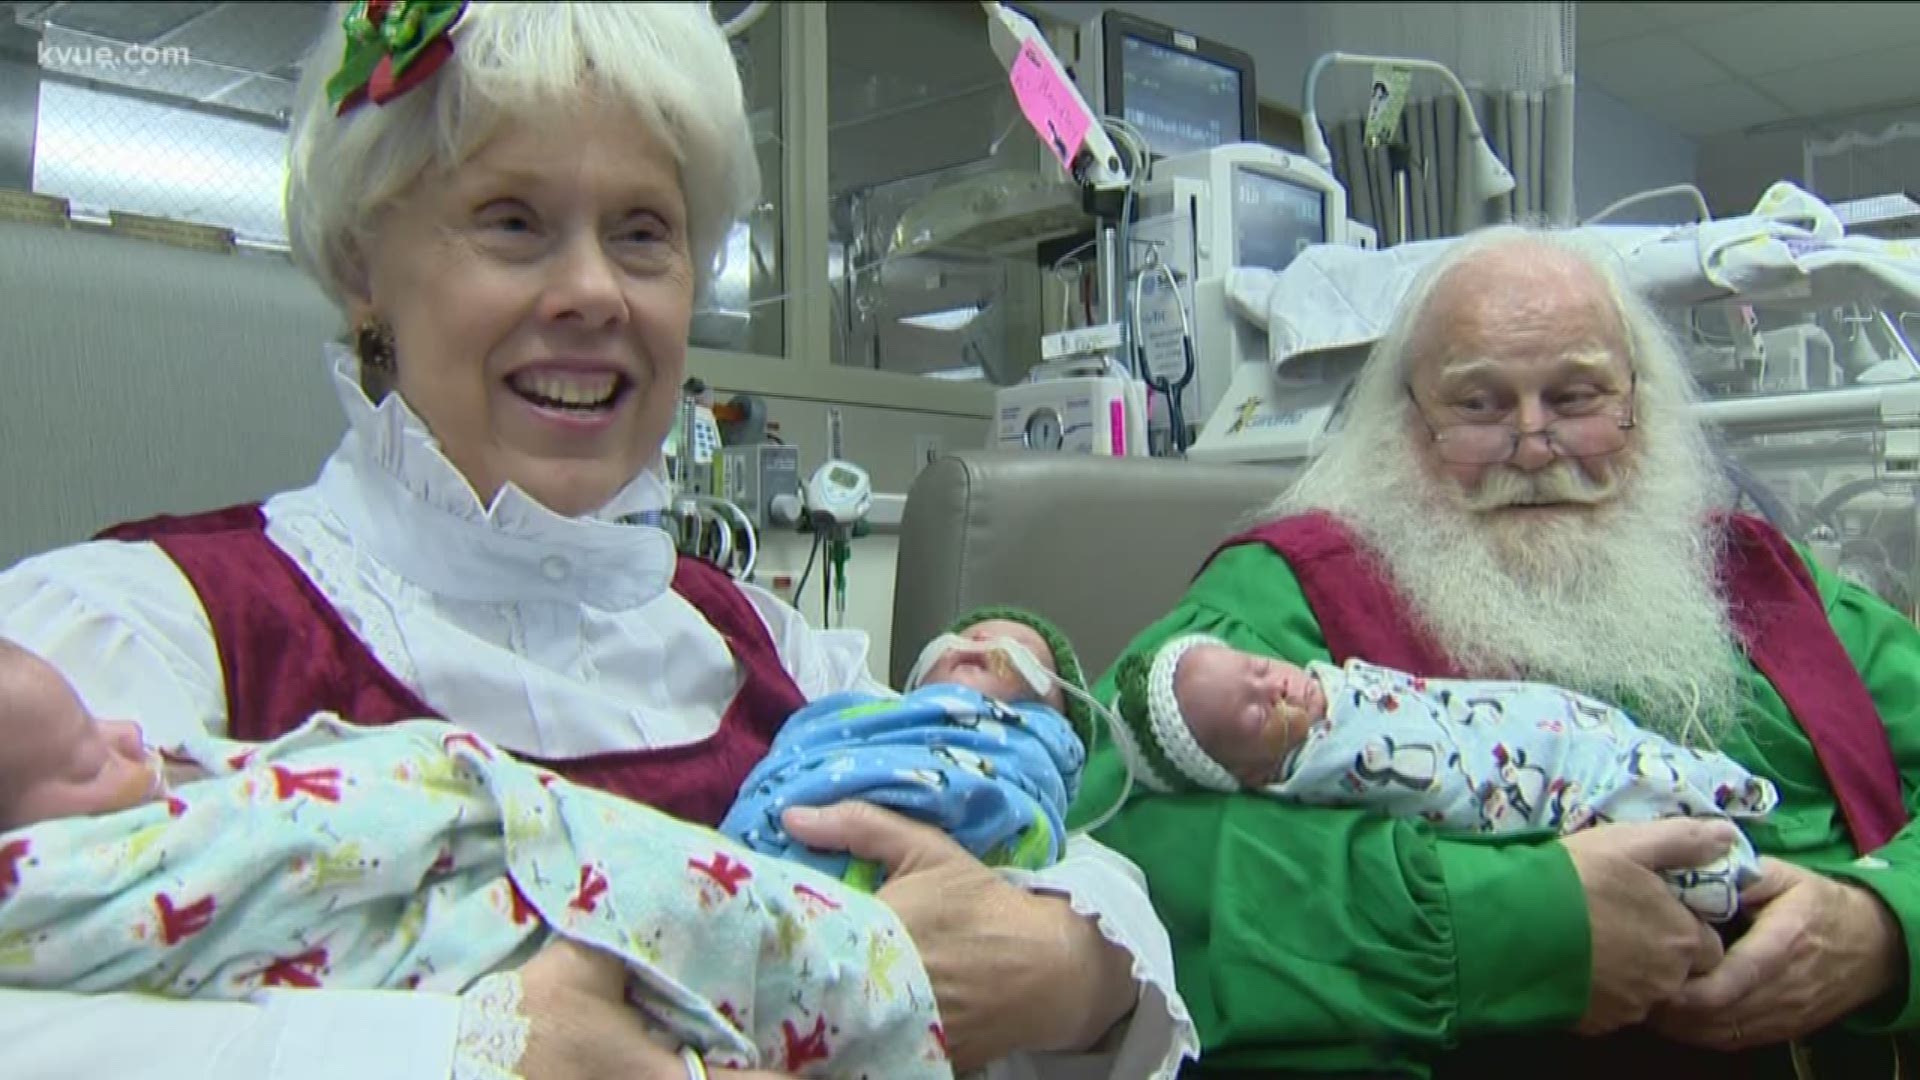 Christmas came early for the babies at Ascension Seton